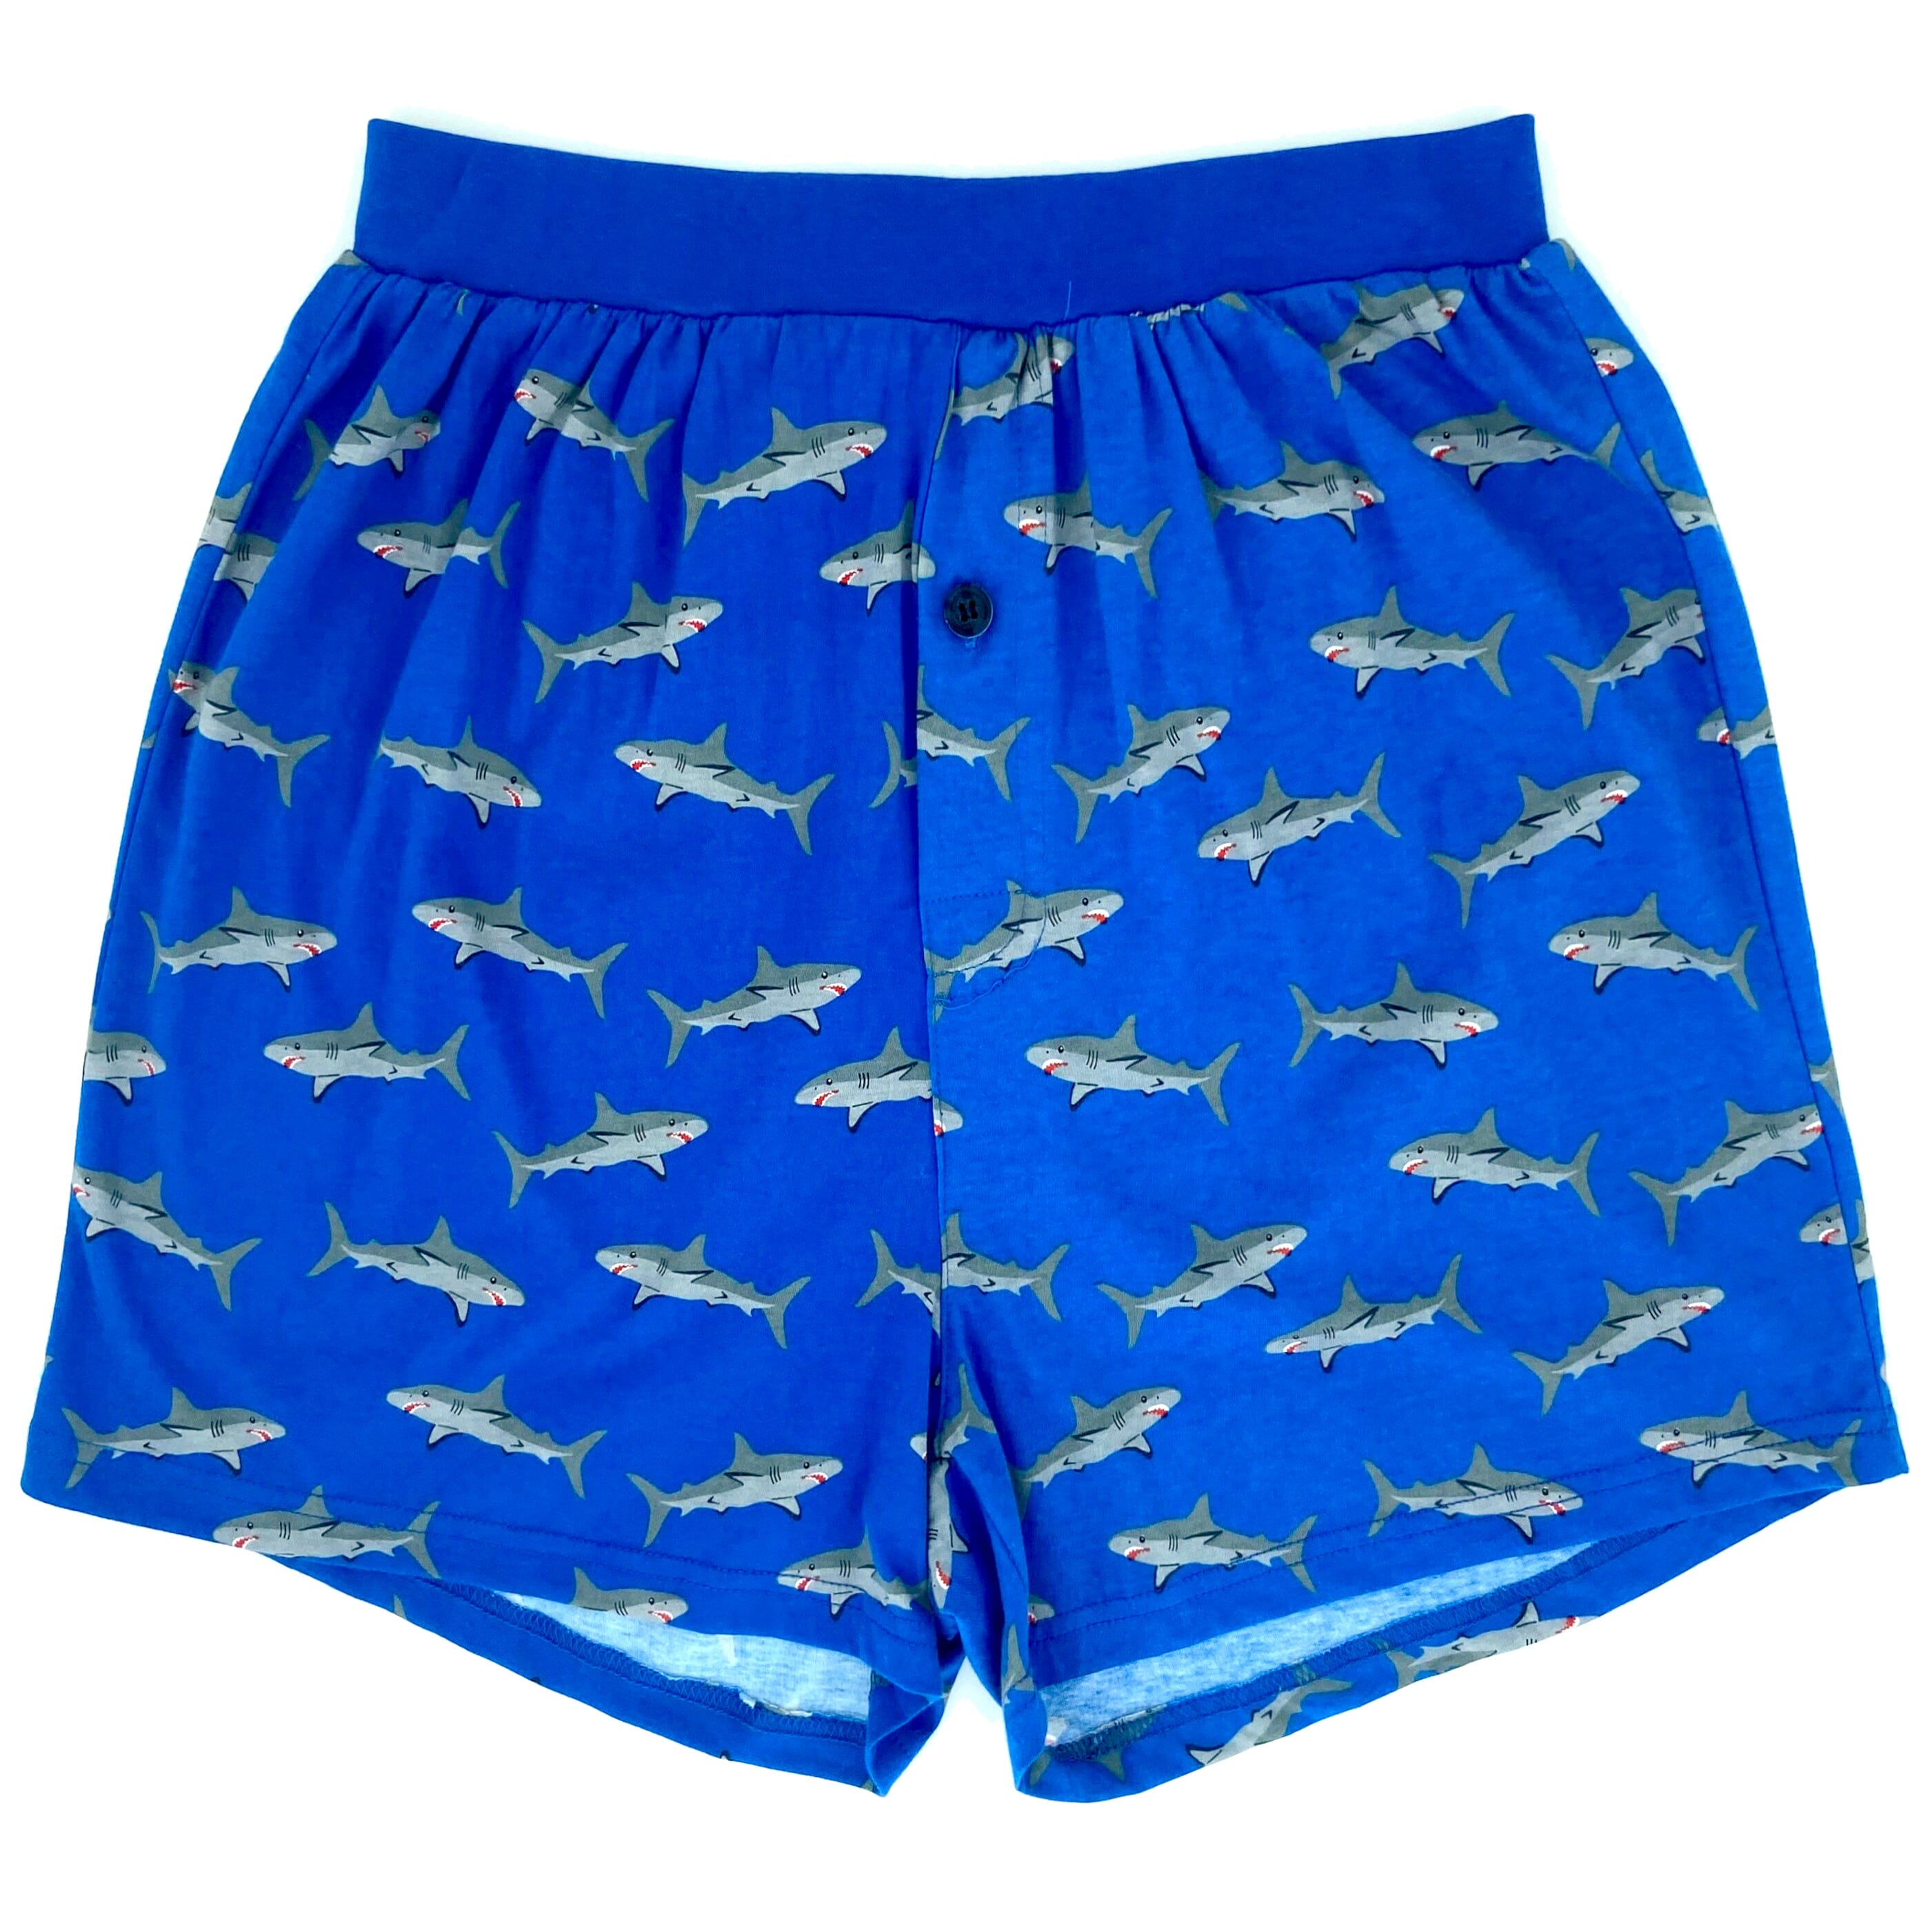 THESE SHORTS ARE SOME-FIN SPECIAL